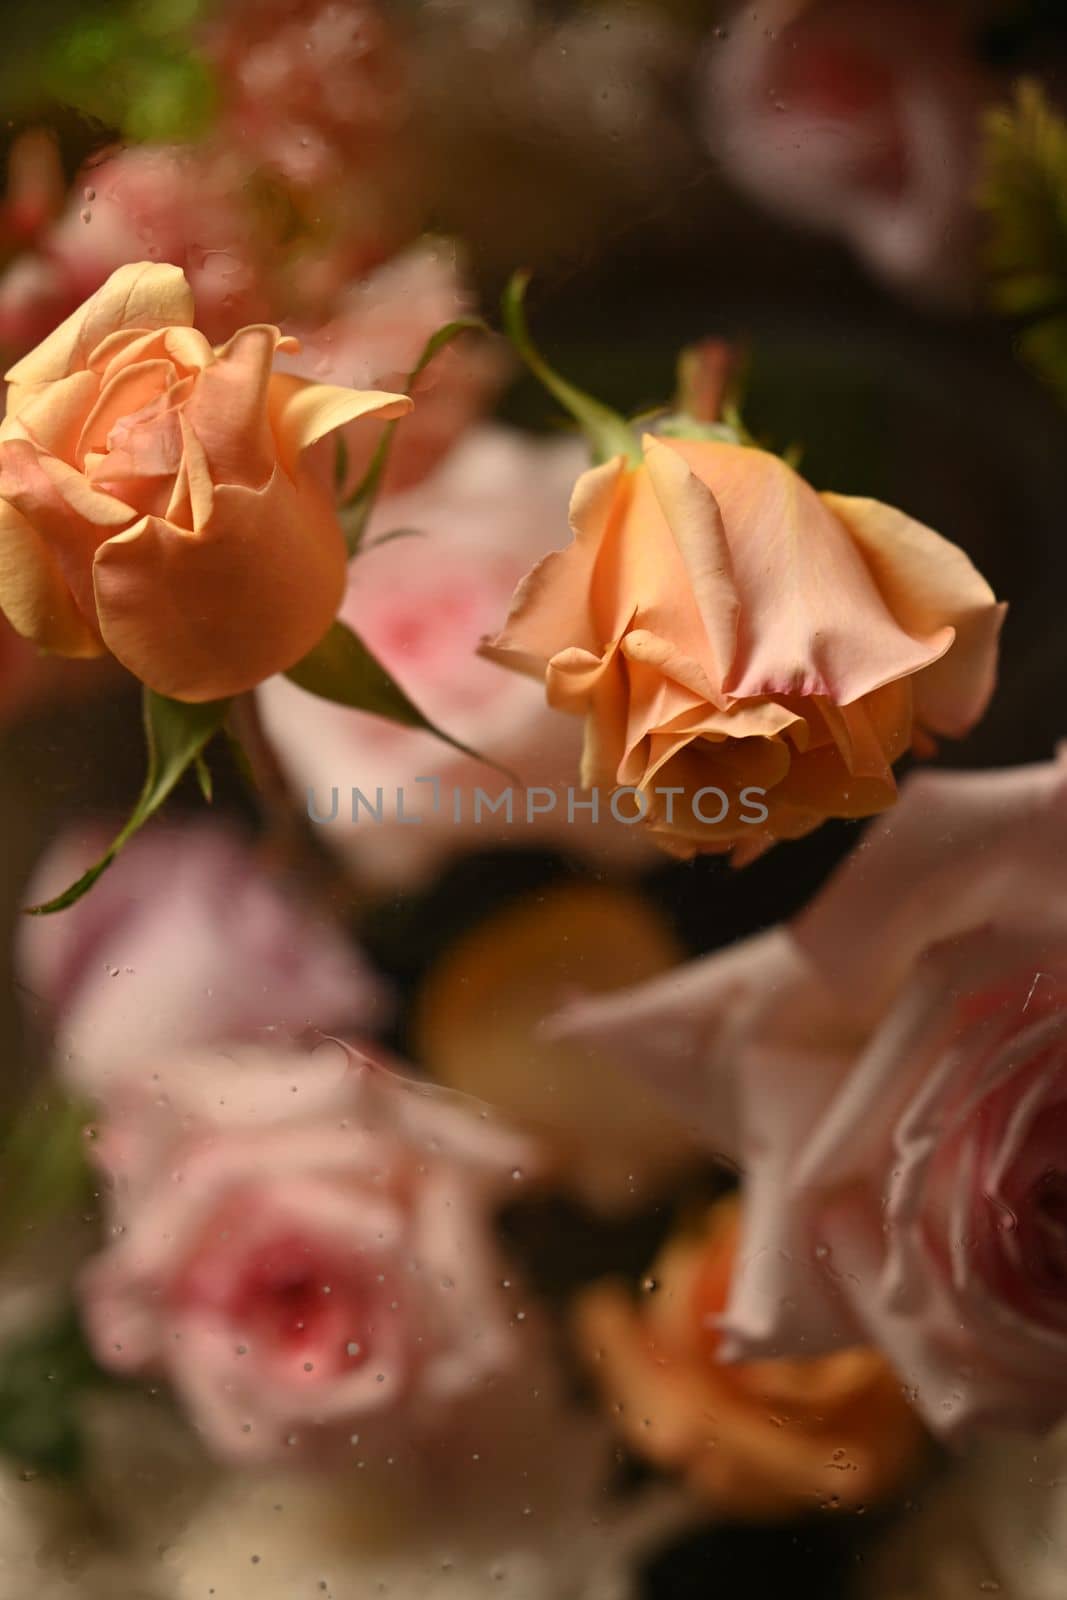  Bouquet of orange and pink roses,Template for fabrics, textiles, paper and floral botanical wallpaper by prathanchorruangsak